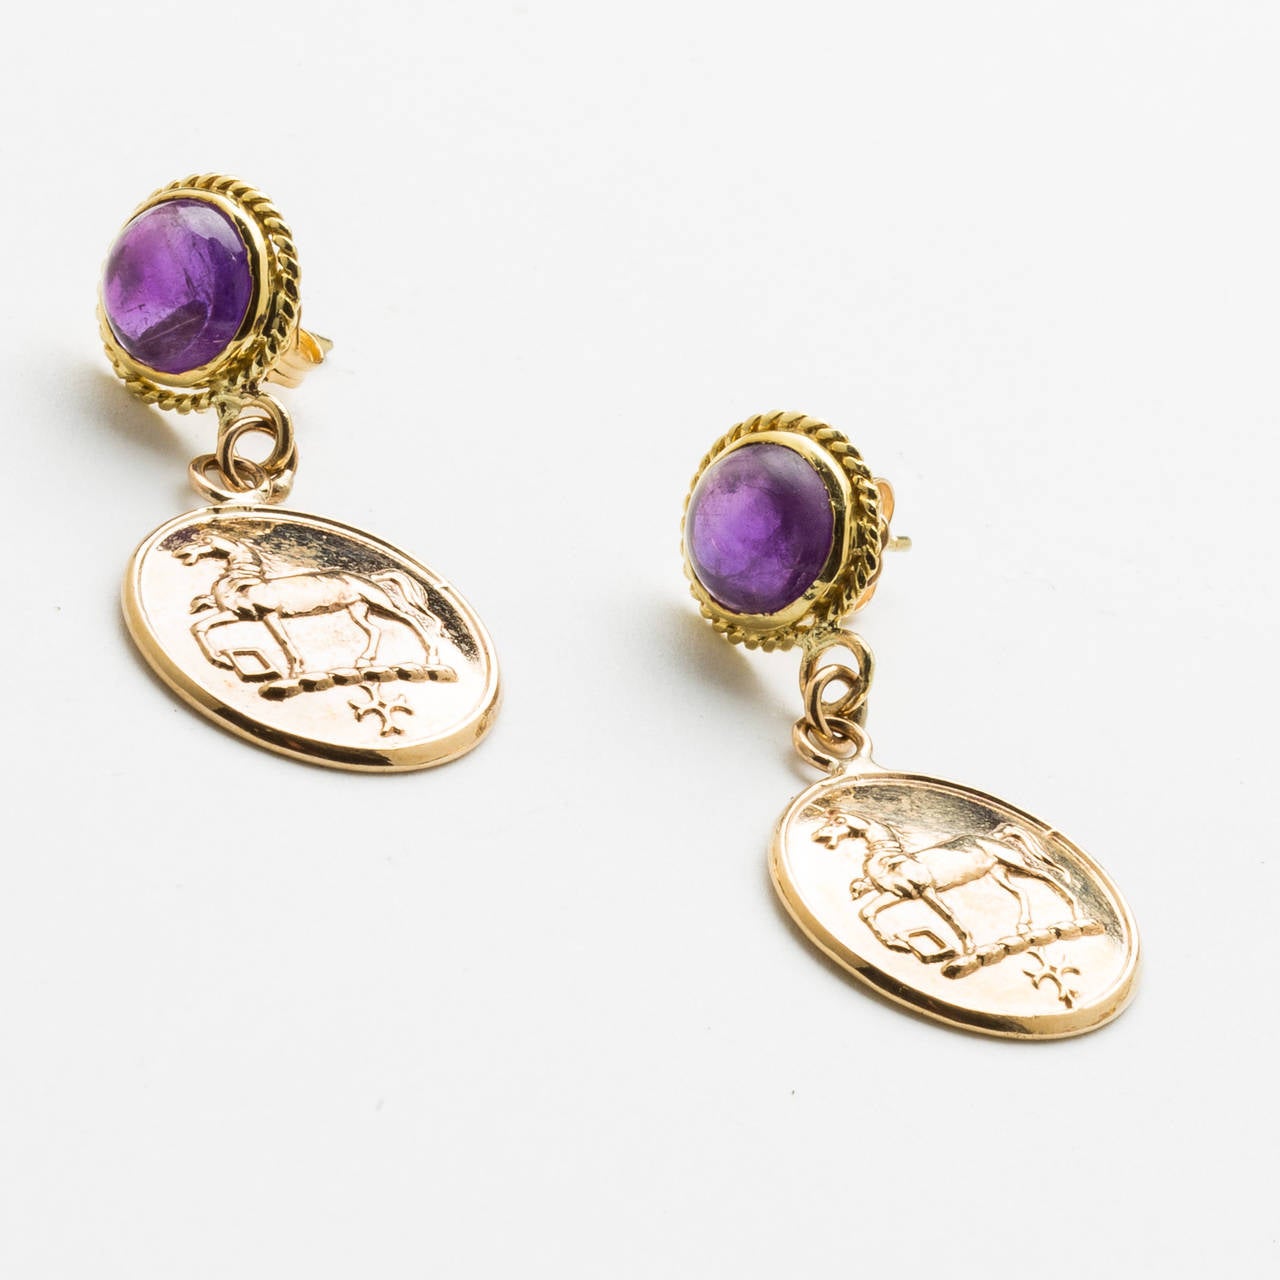 A pair of lovely 10 karat rose gold stamped equestrian coin earrings, in low relief, dangling from round amethyst cabochons studs set in twist wire 18 Karat yellow gold frame. For pierced ears. Coins 18mm round & amethyst cabochons 8mm round.